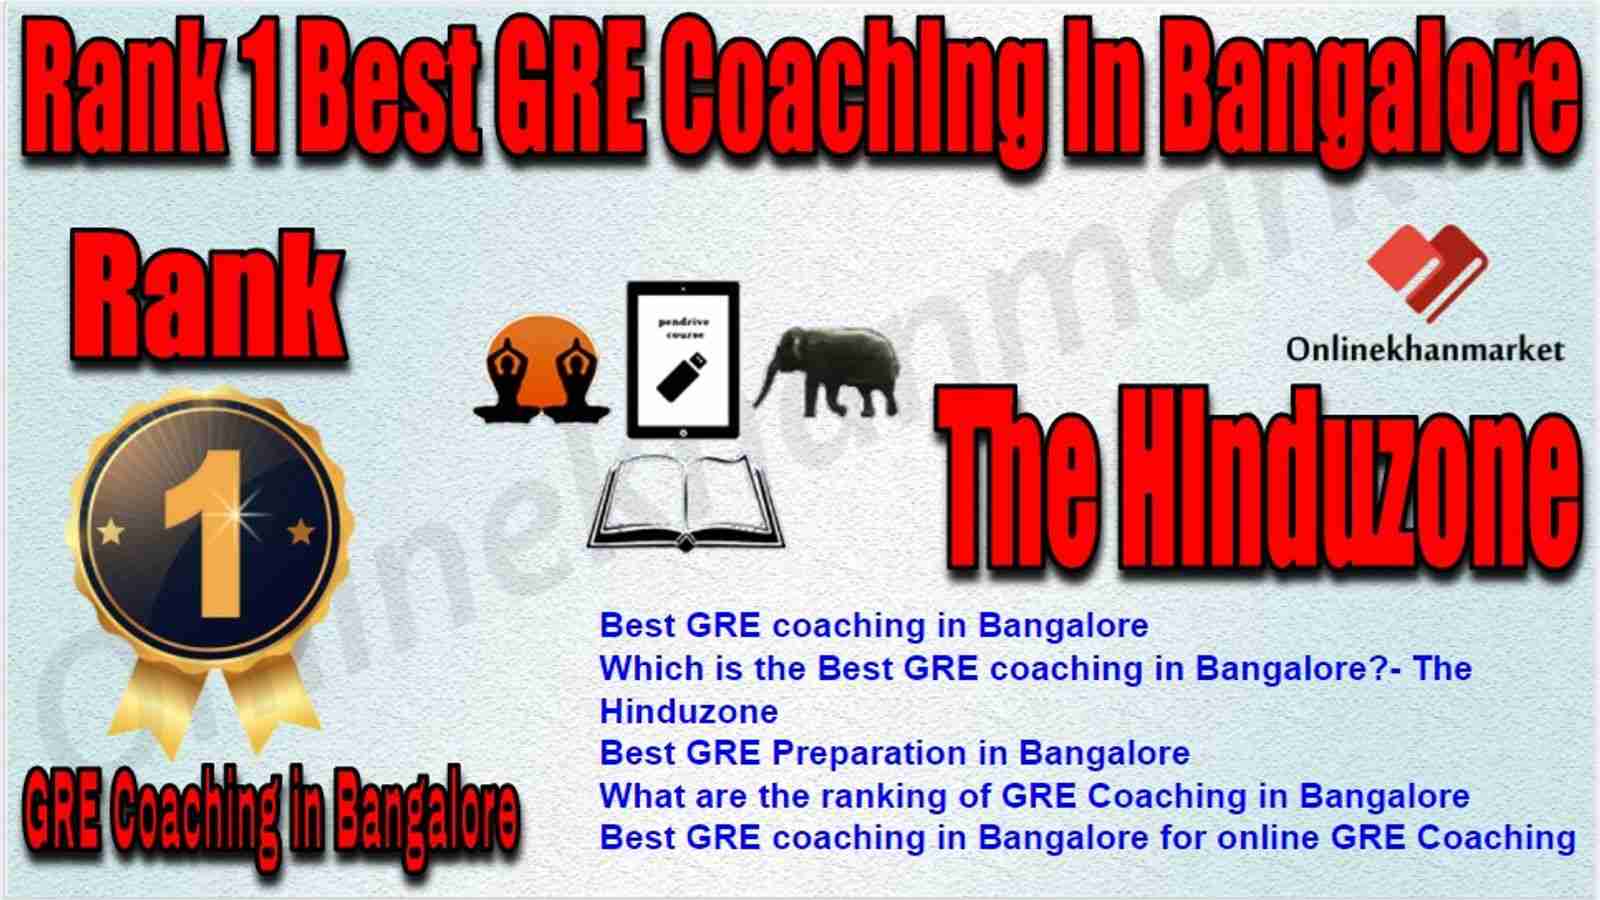 Rank 1 Best GRE Coaching in Bangalore